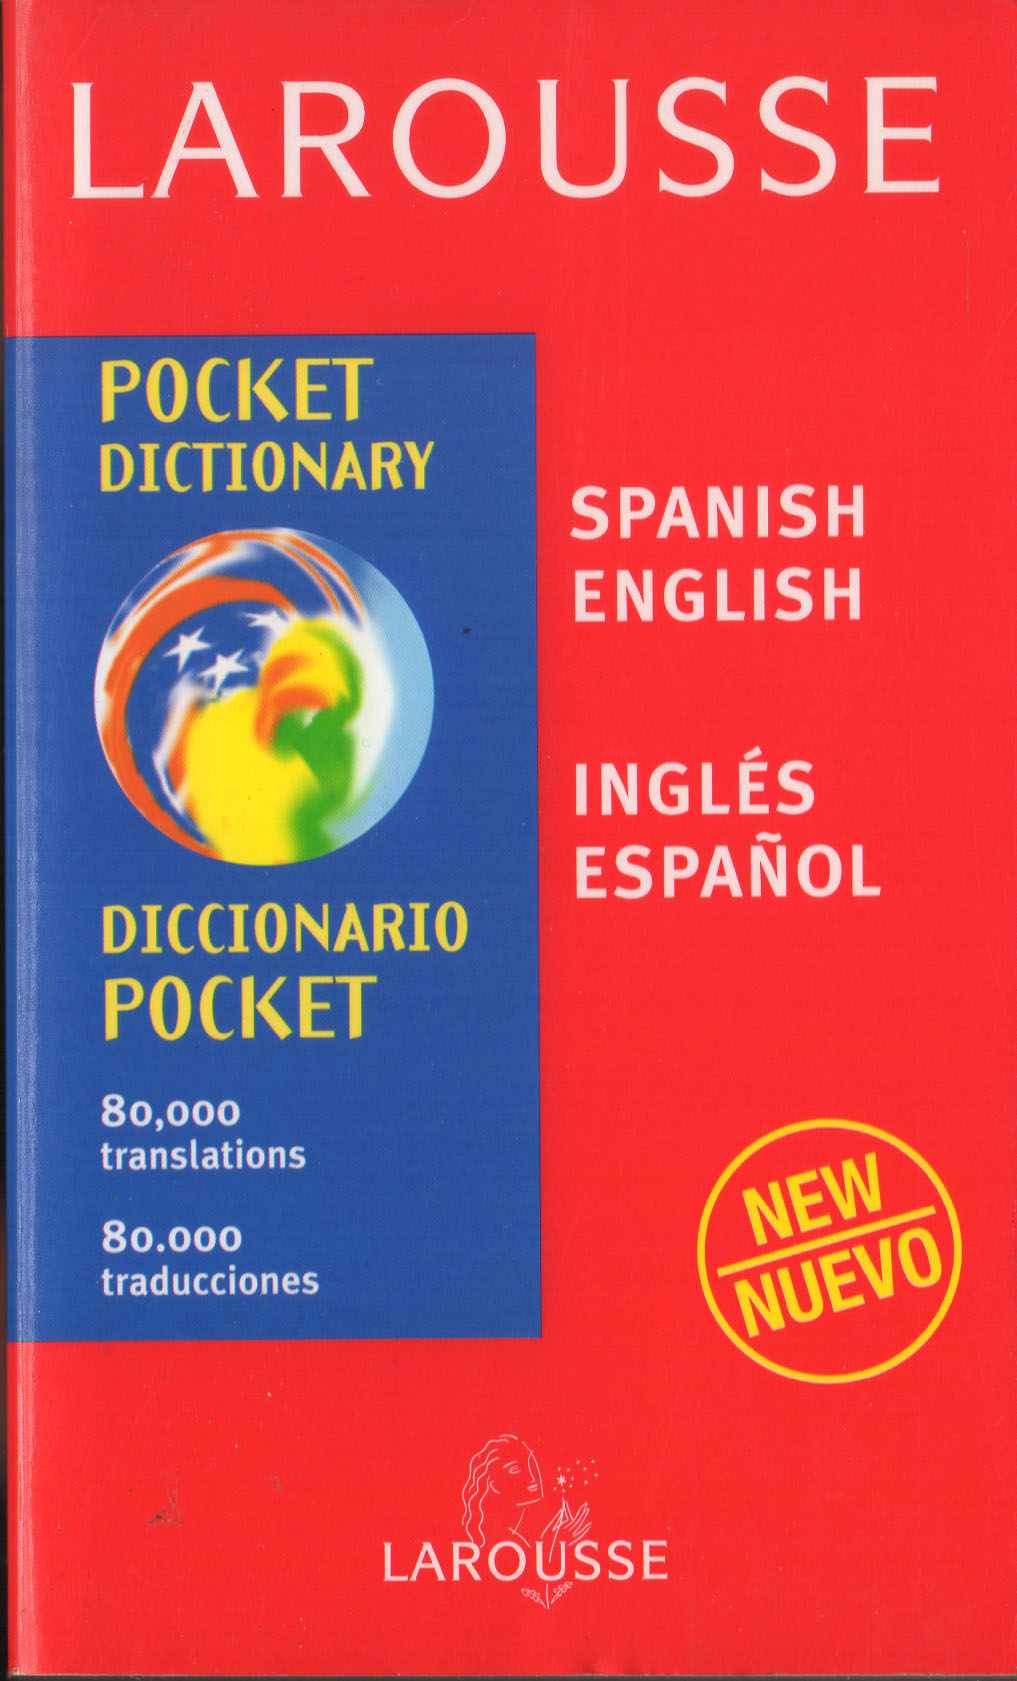 english-to-spanish-dictionary-download-for-pc-hardopol